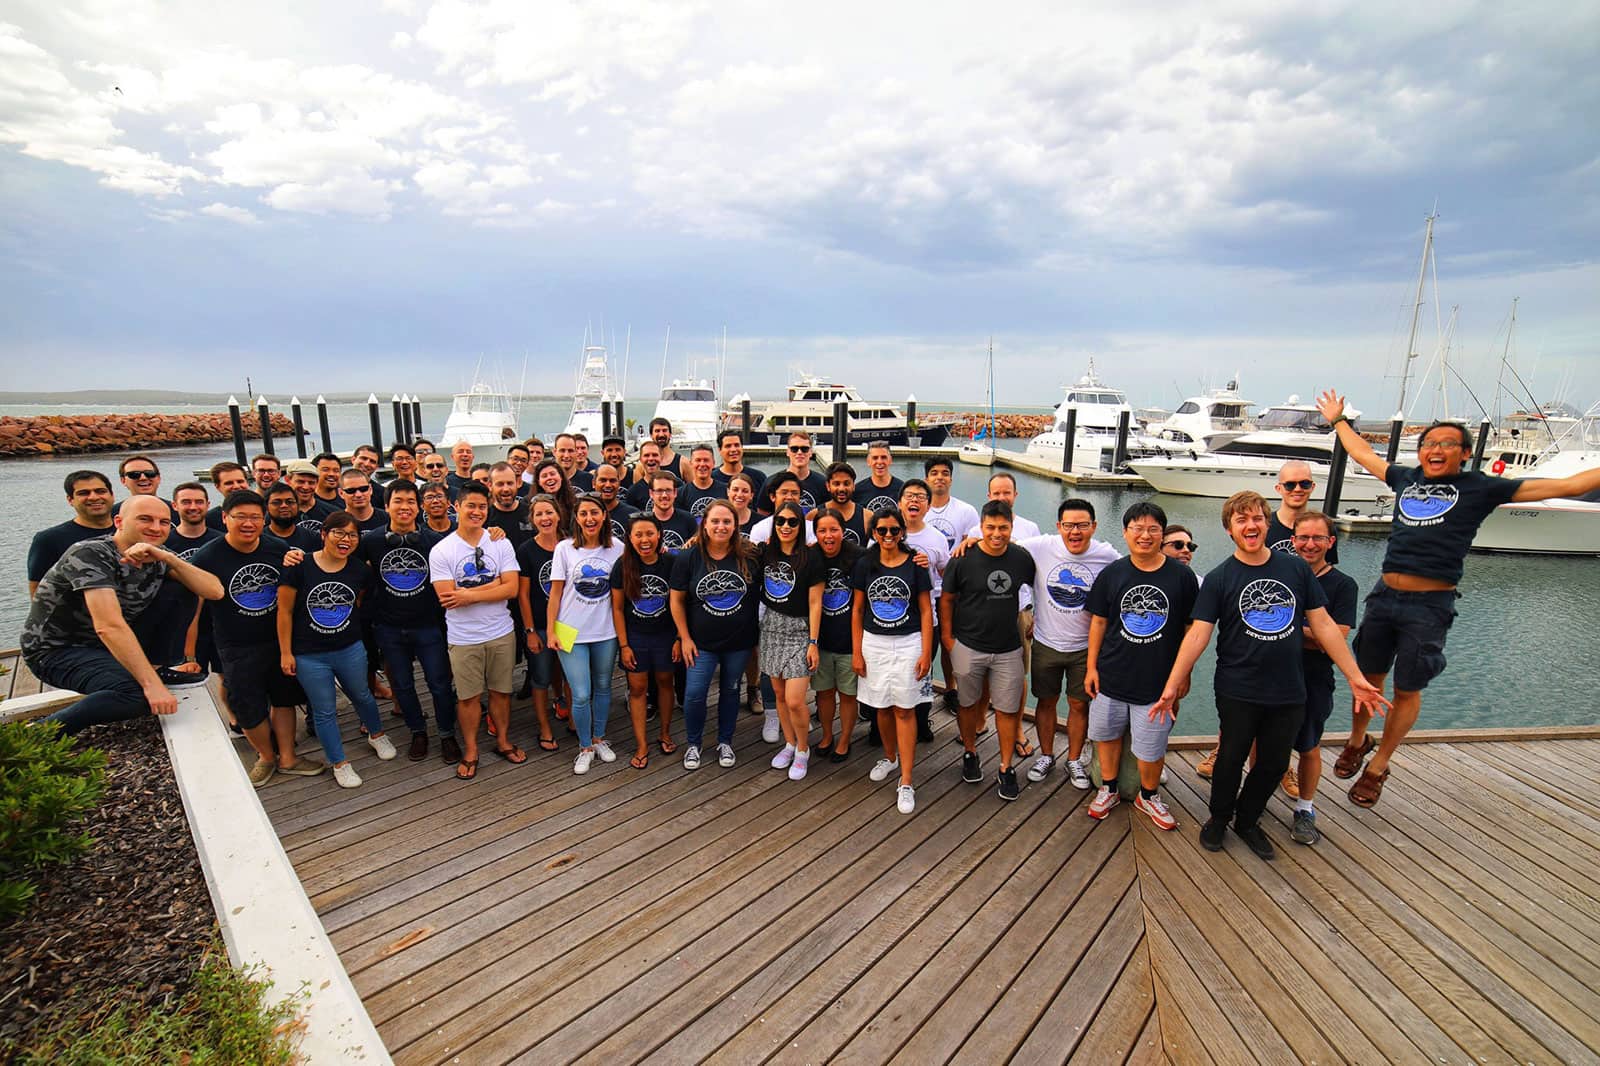 A group of people, all smiling or looking excited, standing on a boardwalk with some boats in the background. The people are wearing shirts with similar designs, mostly dark coloured but some white in colour